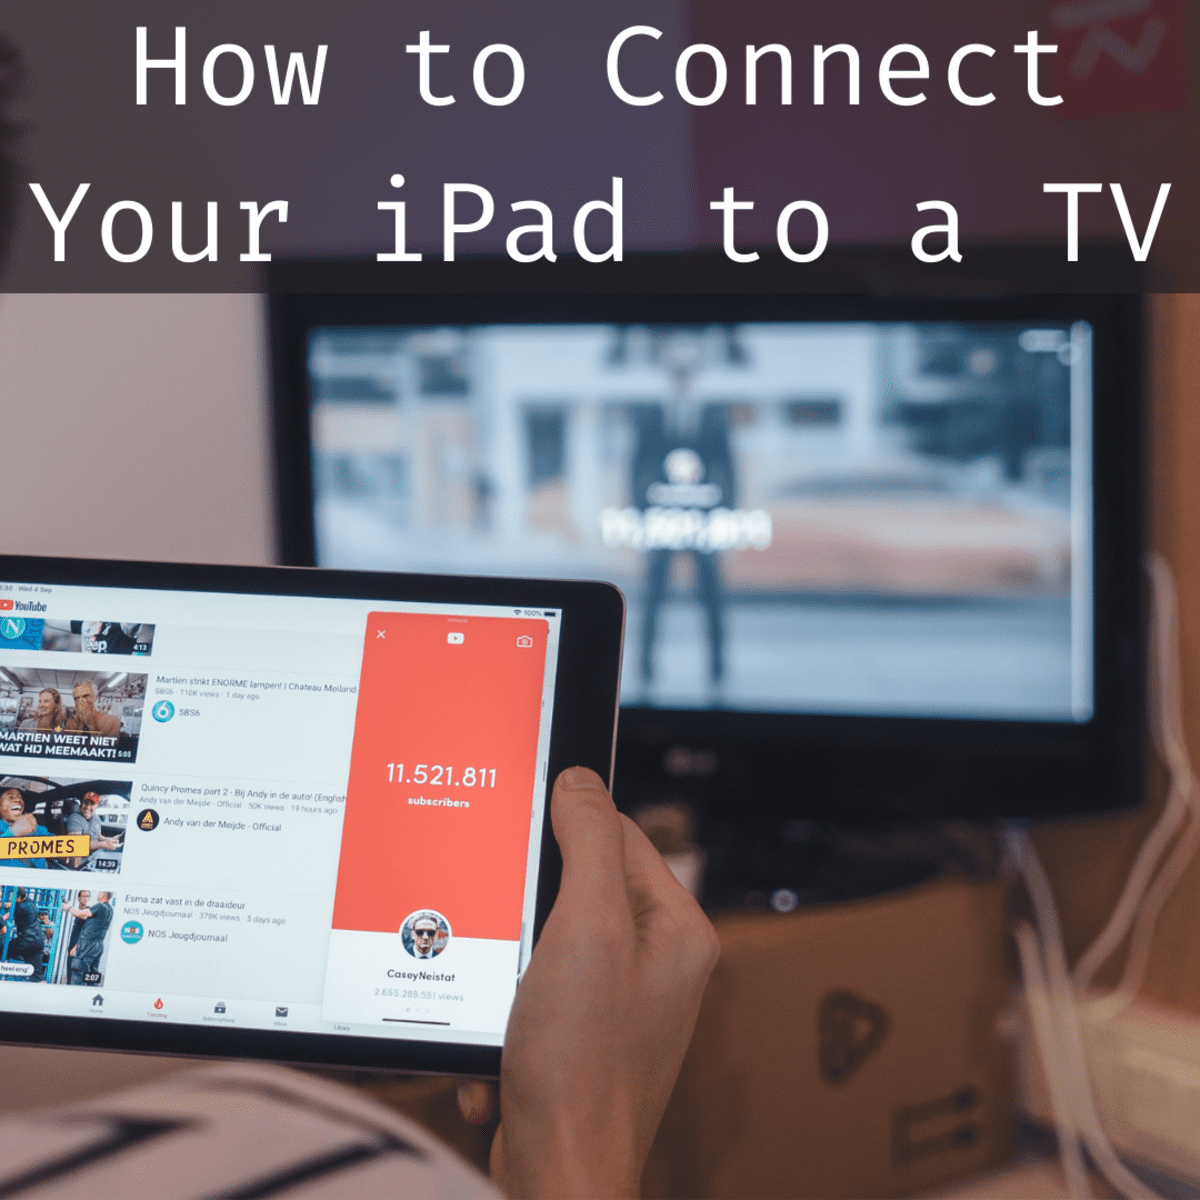 How To Connect An Ipad Tv With Hdmi, How Can I Mirror My Ipad Screen To Pc Wirelessly